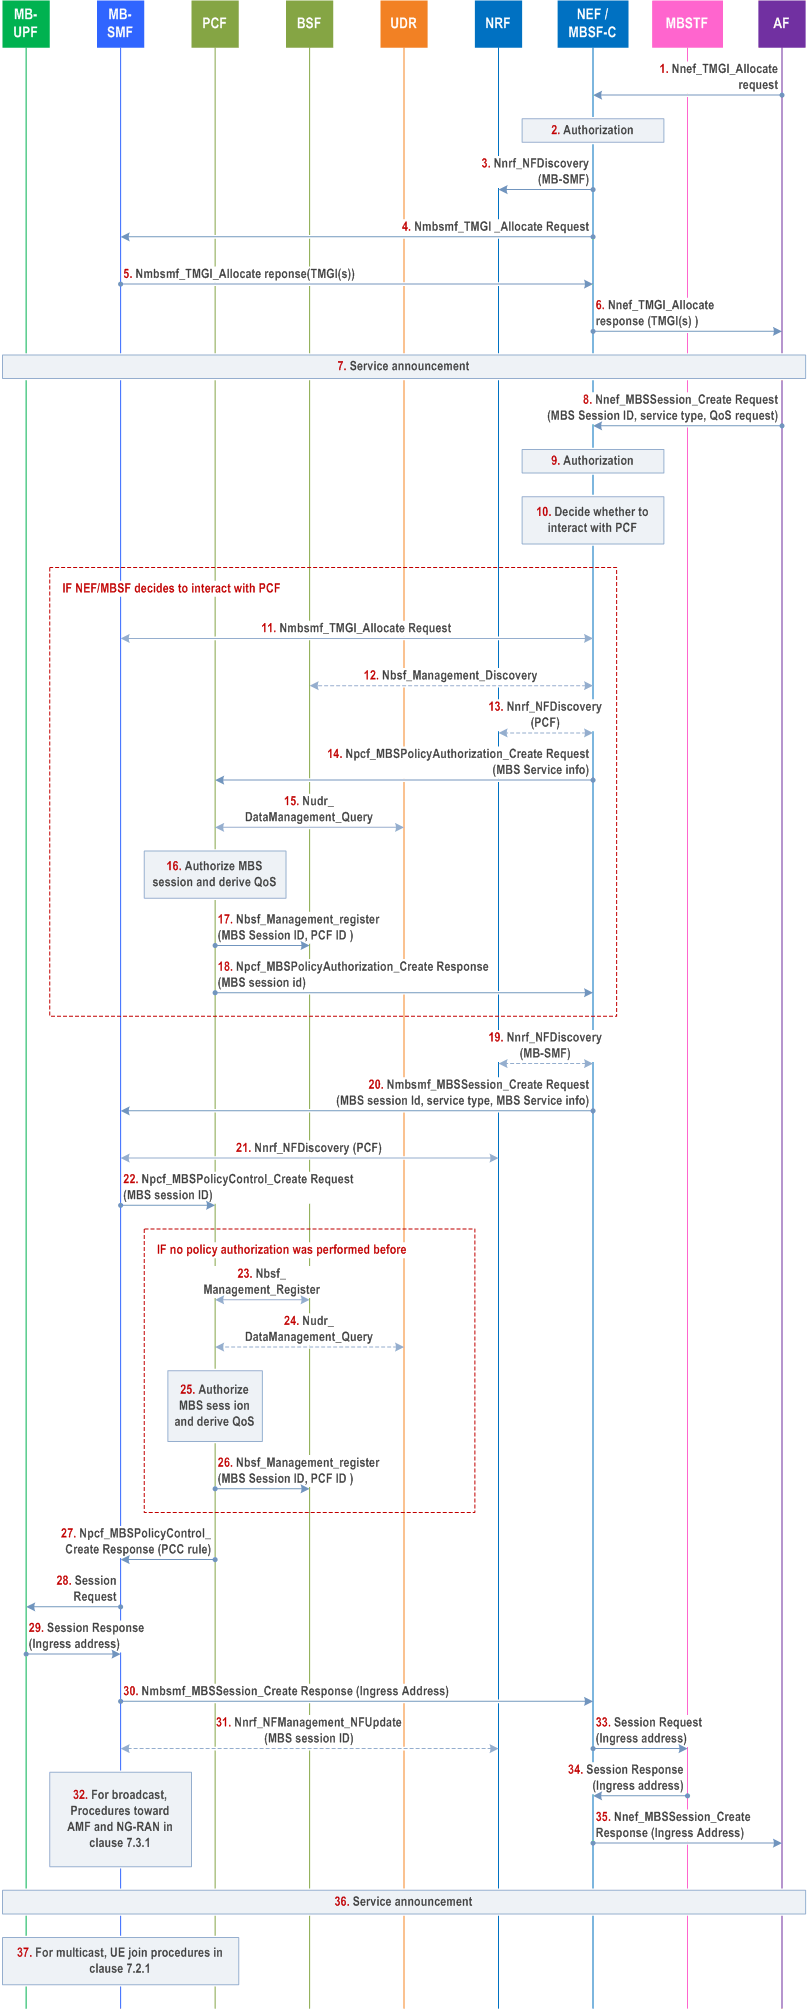 Reproduction of 3GPP TS 23.247, Fig. 7.1.1.3-1: MBS Session Creation with PCC